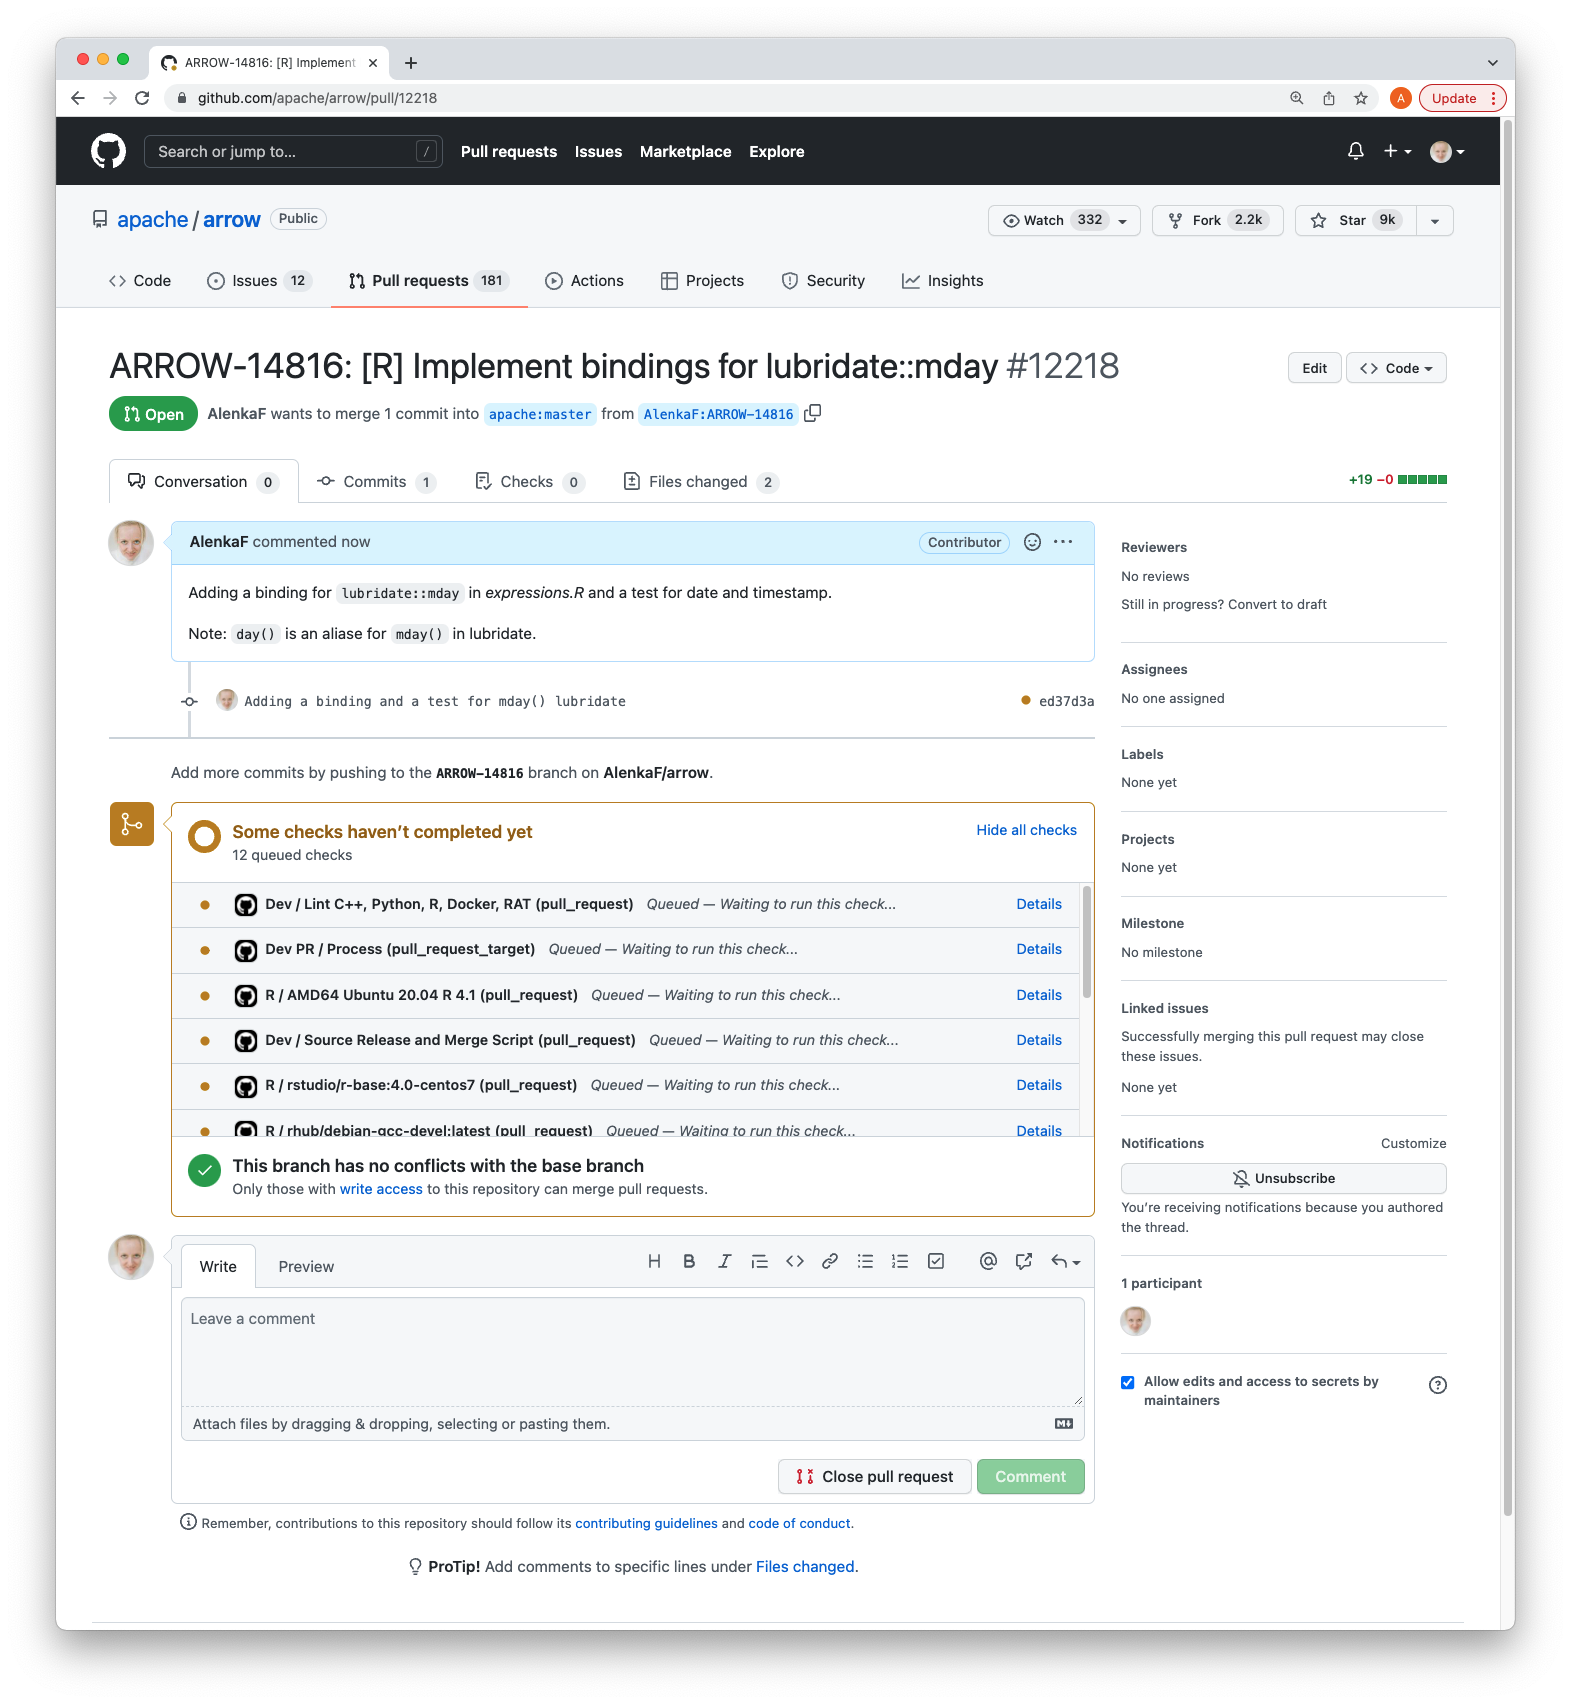 GitHub page of the Pull Request showing the title and a description.